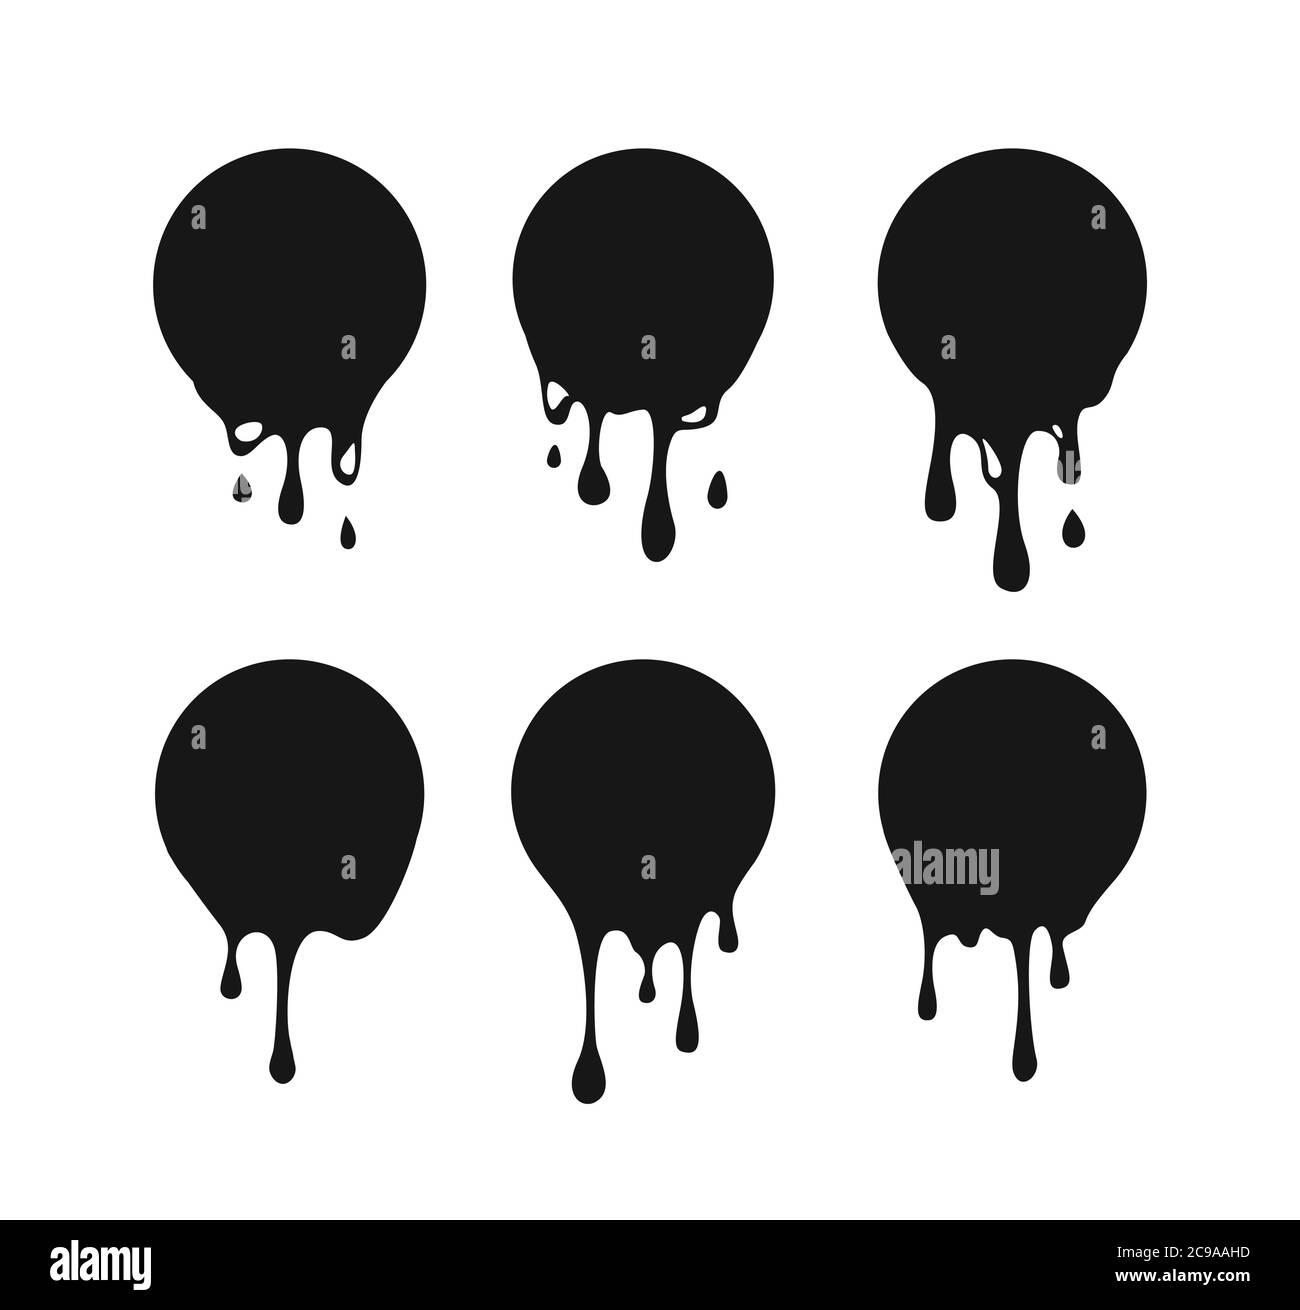 Dripping circle paint. Drip drops, round spots, splash shapes, ink paint leak or circle liquid black stains isolated collection. Vector illustration. Stock Vector